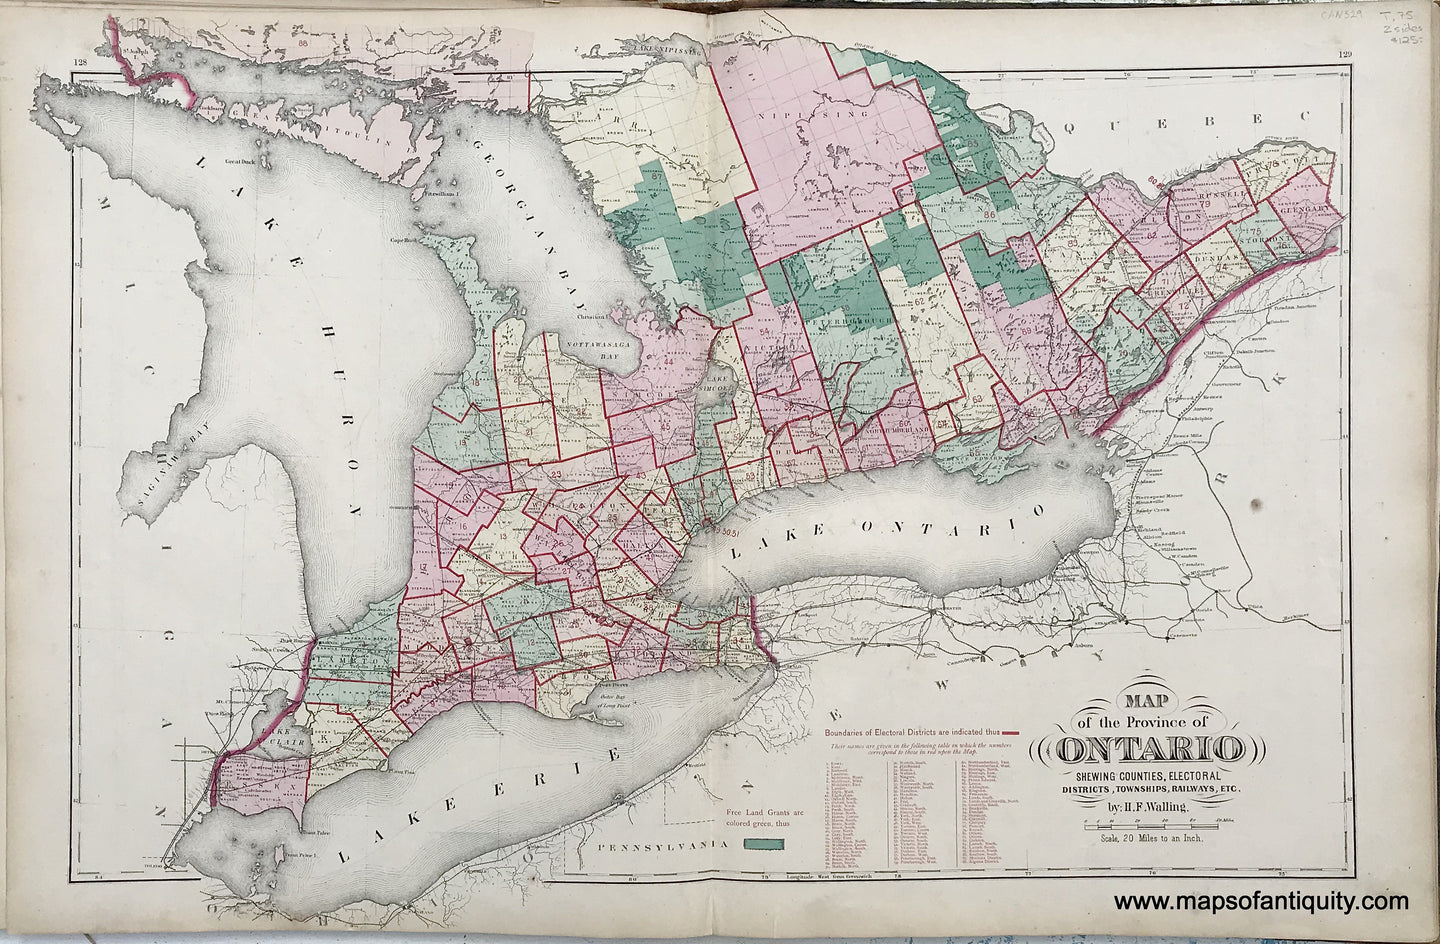 Antique-Map-Sheet-with-three-maps:-Map-of-the-Province-of-Ontario-Shewing-Counties-Electoral-Districts-Townships-Railways-etc.-/-Map-of-the-Eestern-Part-of-Algoma-District-on-the-North-Shore-of-Lake-Huron-Shewing-Towns-Post-Offices-etc.-/-District-of-Nippissing-1875-Walling-/-Tackabury-Canada-Civil-War-1800s-19th-century-Maps-of-Antiquity